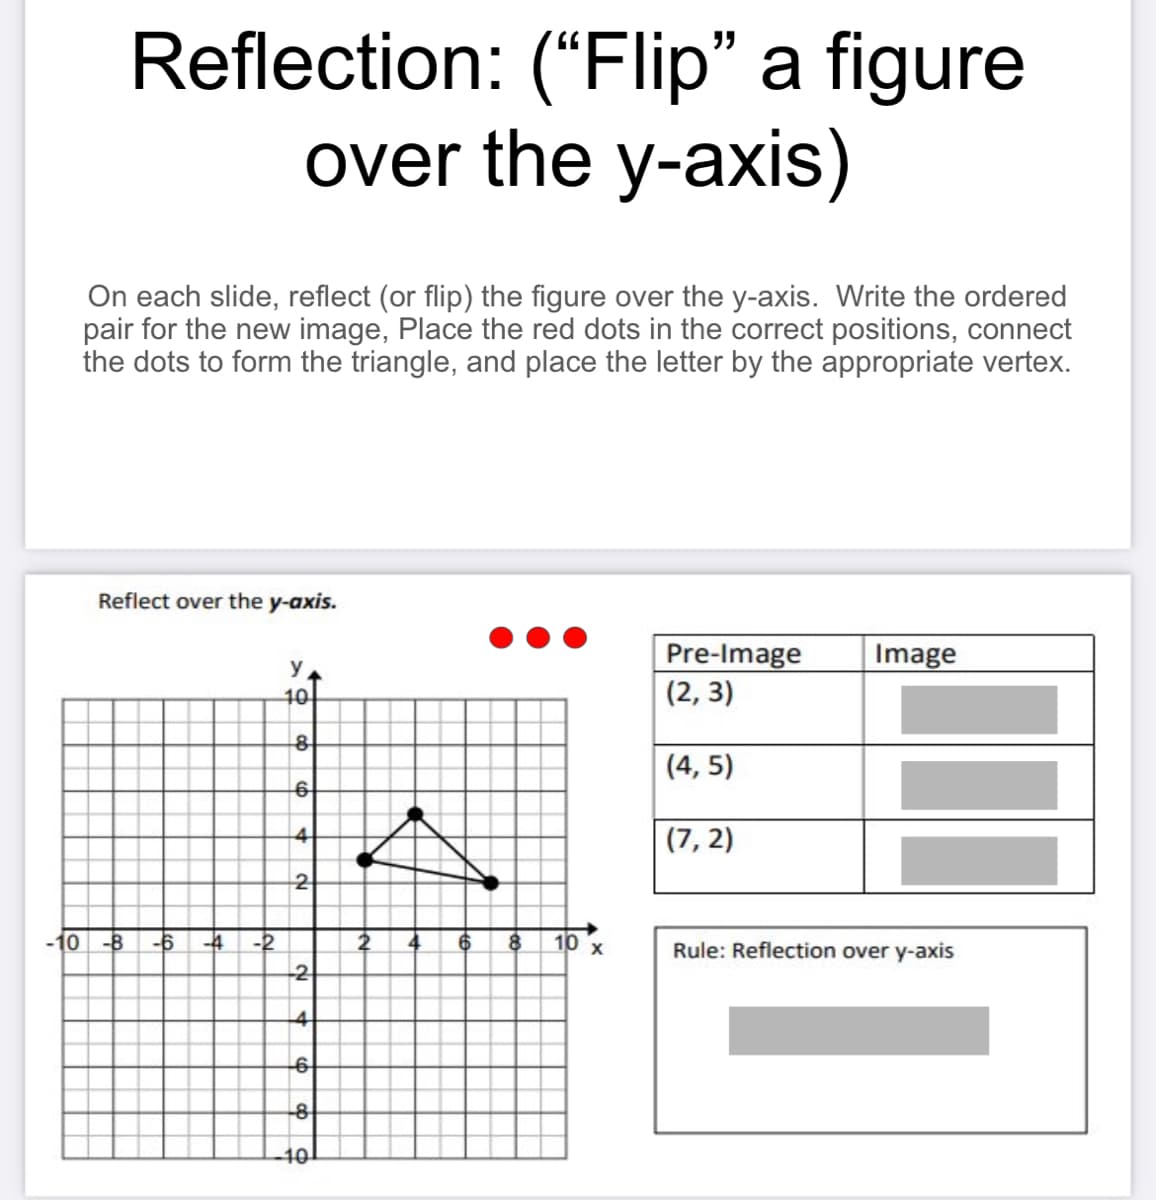 Reflection:
(“Flip" a figure
over the y-axis)
On each slide, reflect (or flip) the figure over the y-axis. Write the ordered
pair for the new image, Place the red dots in the correct positions, connect
the dots to form the triangle, and place the letter by the appropriate vertex.
Reflect over the y-axis.
Pre-Image
(2, 3)
Image
y
10
(4, 5)
(7, 2)
2
10 -B
-6
-4
-2
8
10 x
Rule: Reflection over y-axis
-2
4
-6
40
